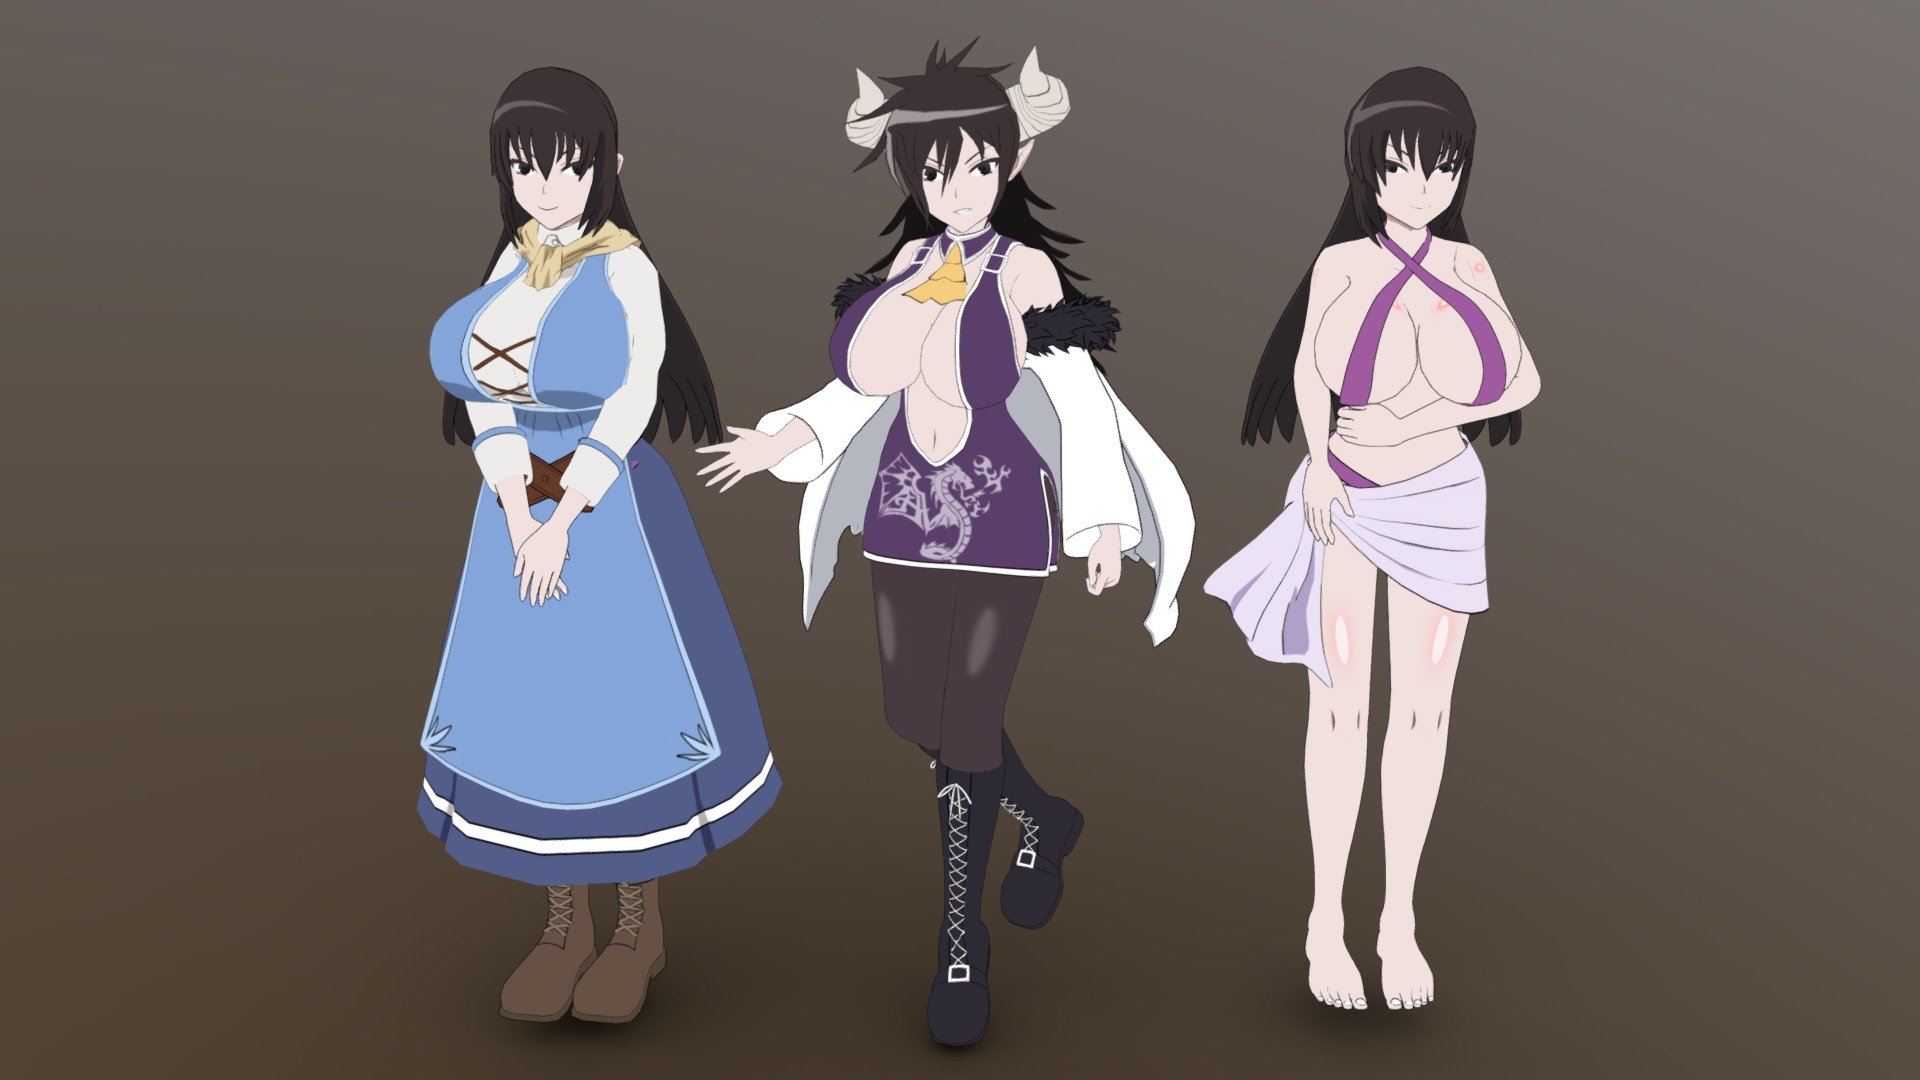 Kilmaria/Maria | Isekai One Turn Kill Nee-san 3D Model Blender 

Kilmaria/Maria character from the anime Isekai One Turn Kill Nee-san

3D Model Rigged. In blend format, for Blender v2.29 Blender render, with nodes, material Toon Shader.

ontents of the .ZIP file:

Download of file: cgtrader https://encurtador.com.br/gyGR3

● Folder with all textures in .PNG Format.

● .blend file with the complete 3D Model.

Contents of the .blend file:

● Full Body, no deleted parts.

● Individual Hair, separated from the body.

● Pieces of clothing, separated from the body. (Individuals, Can be removed)

● Complete RIG, with all bones for movement.

● Materials configured with nodes.

● UV mapping.

● Textures embedded in the .blend file.

● Modifiers. (Subdivide, Solidify and Outline for contours)

Download of file cgtrader https://encurtador.com.br/gyGR3 - Kilmaria | Isekai One Turn Kill Nee-san 3D Model - 3D model by satoru gojo (@satorugojostudio) 3d model